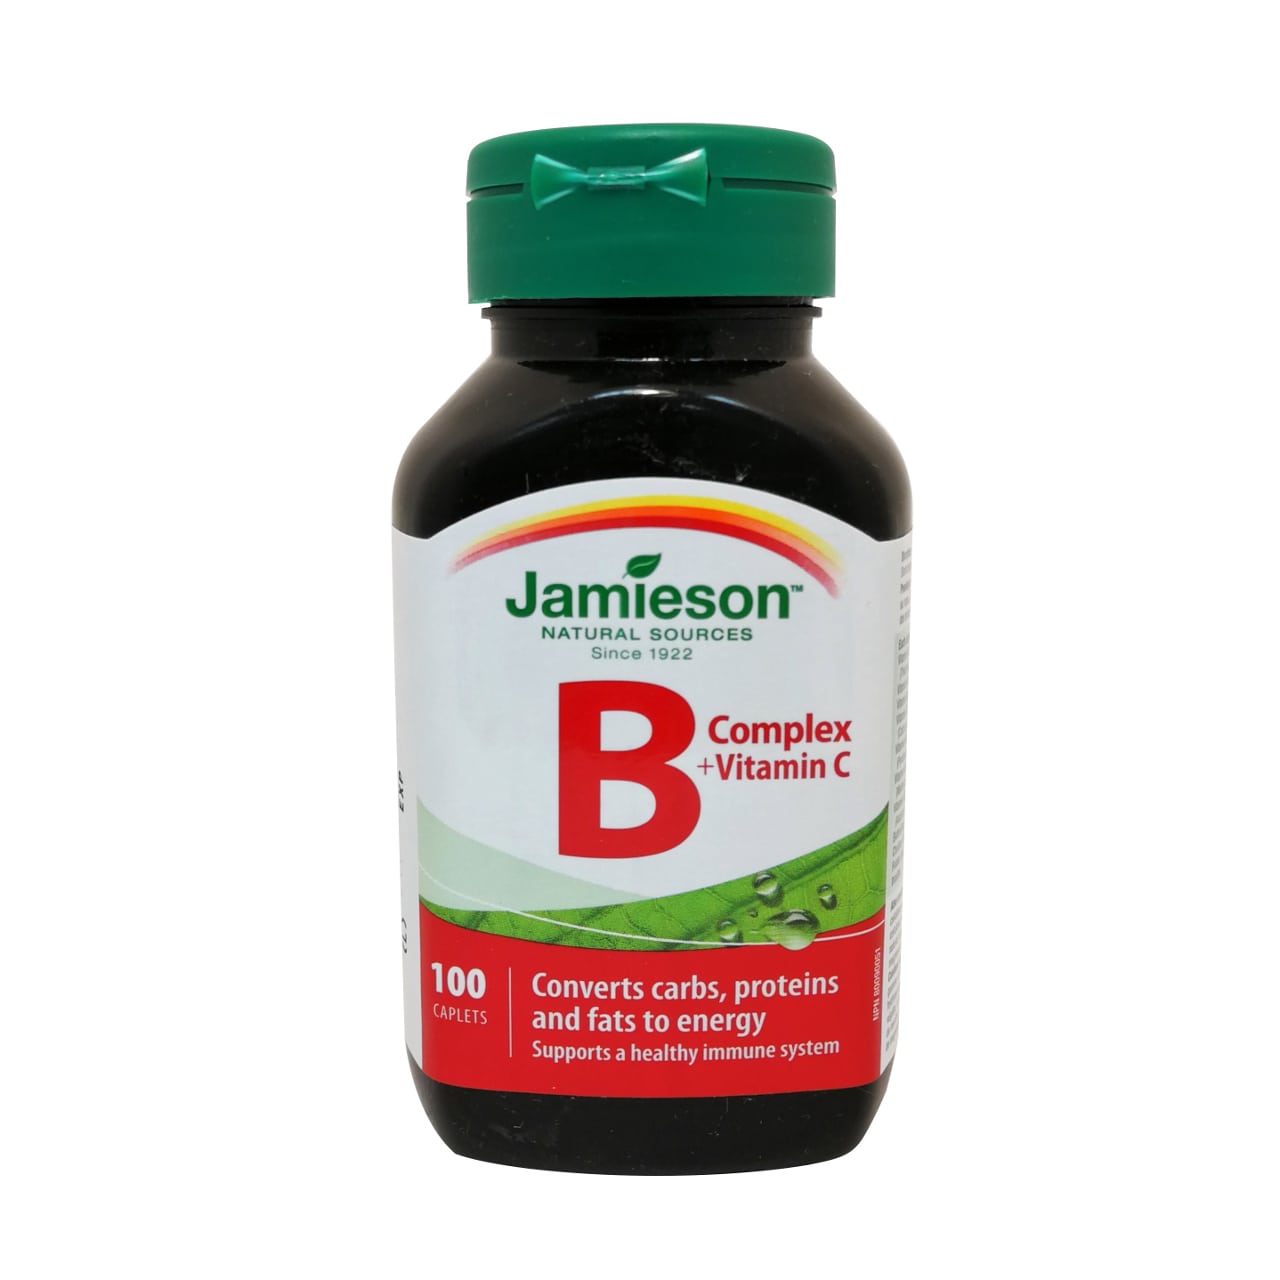 Product label for Jamieson B Complex + Vitamin C in English